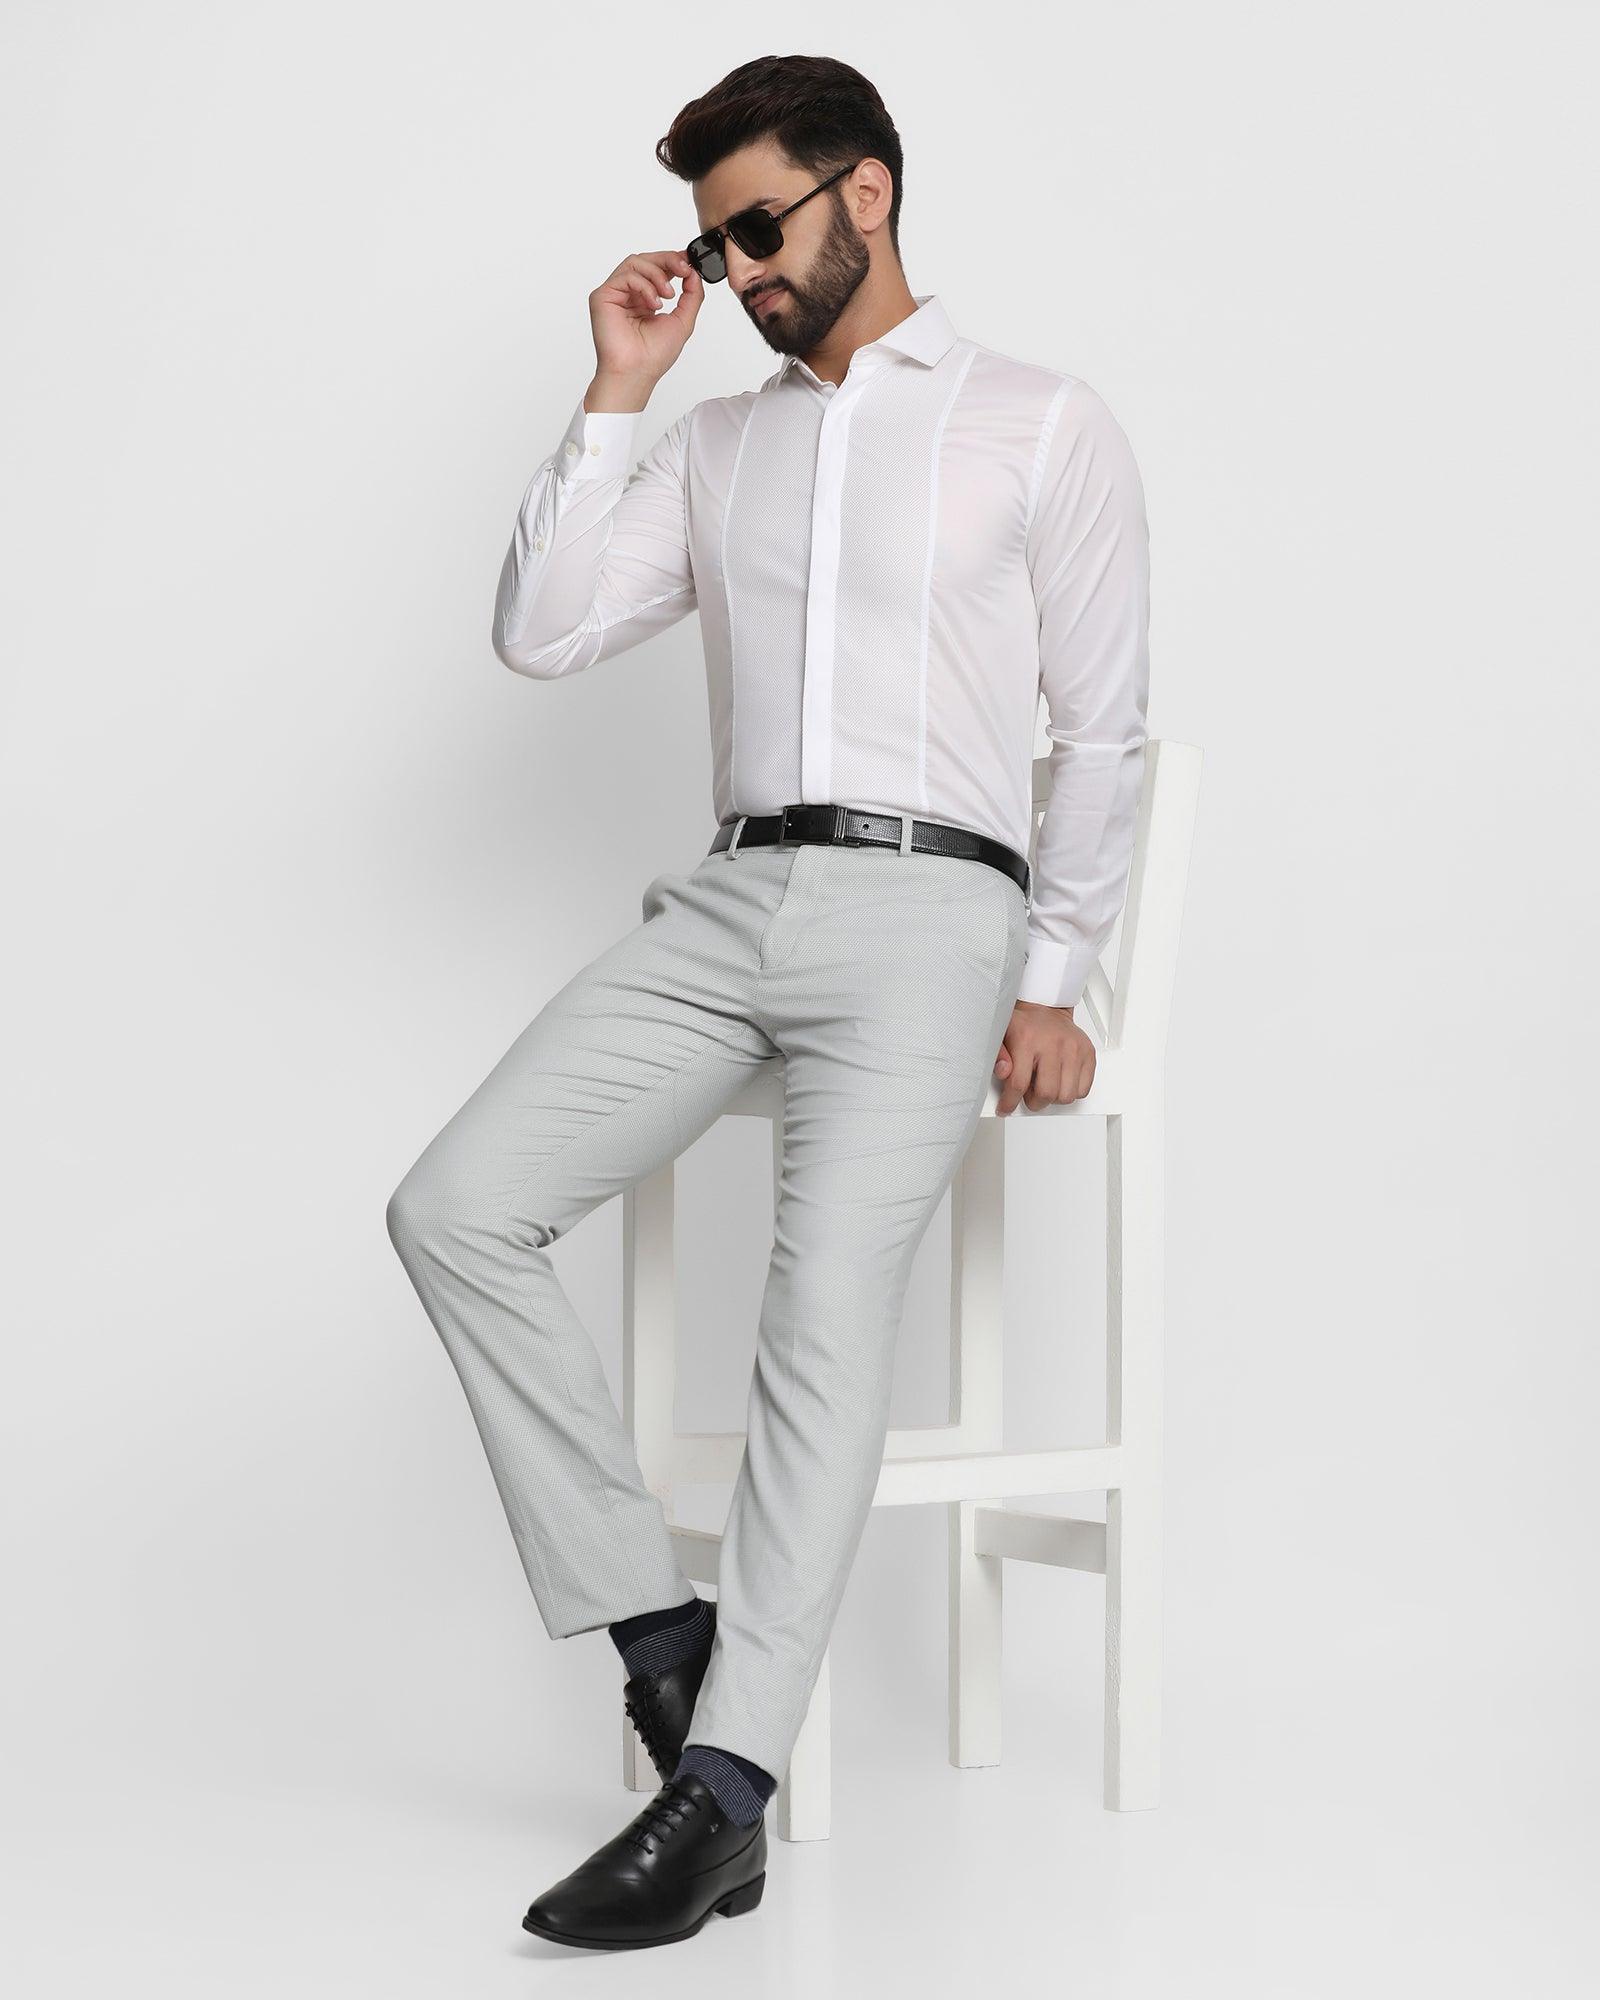 Different Shades of Gray Shirt Dove Grey What Color Pants Go With Gray  Shirts Men | Grey shirt men, Grey shirt, Colored pants